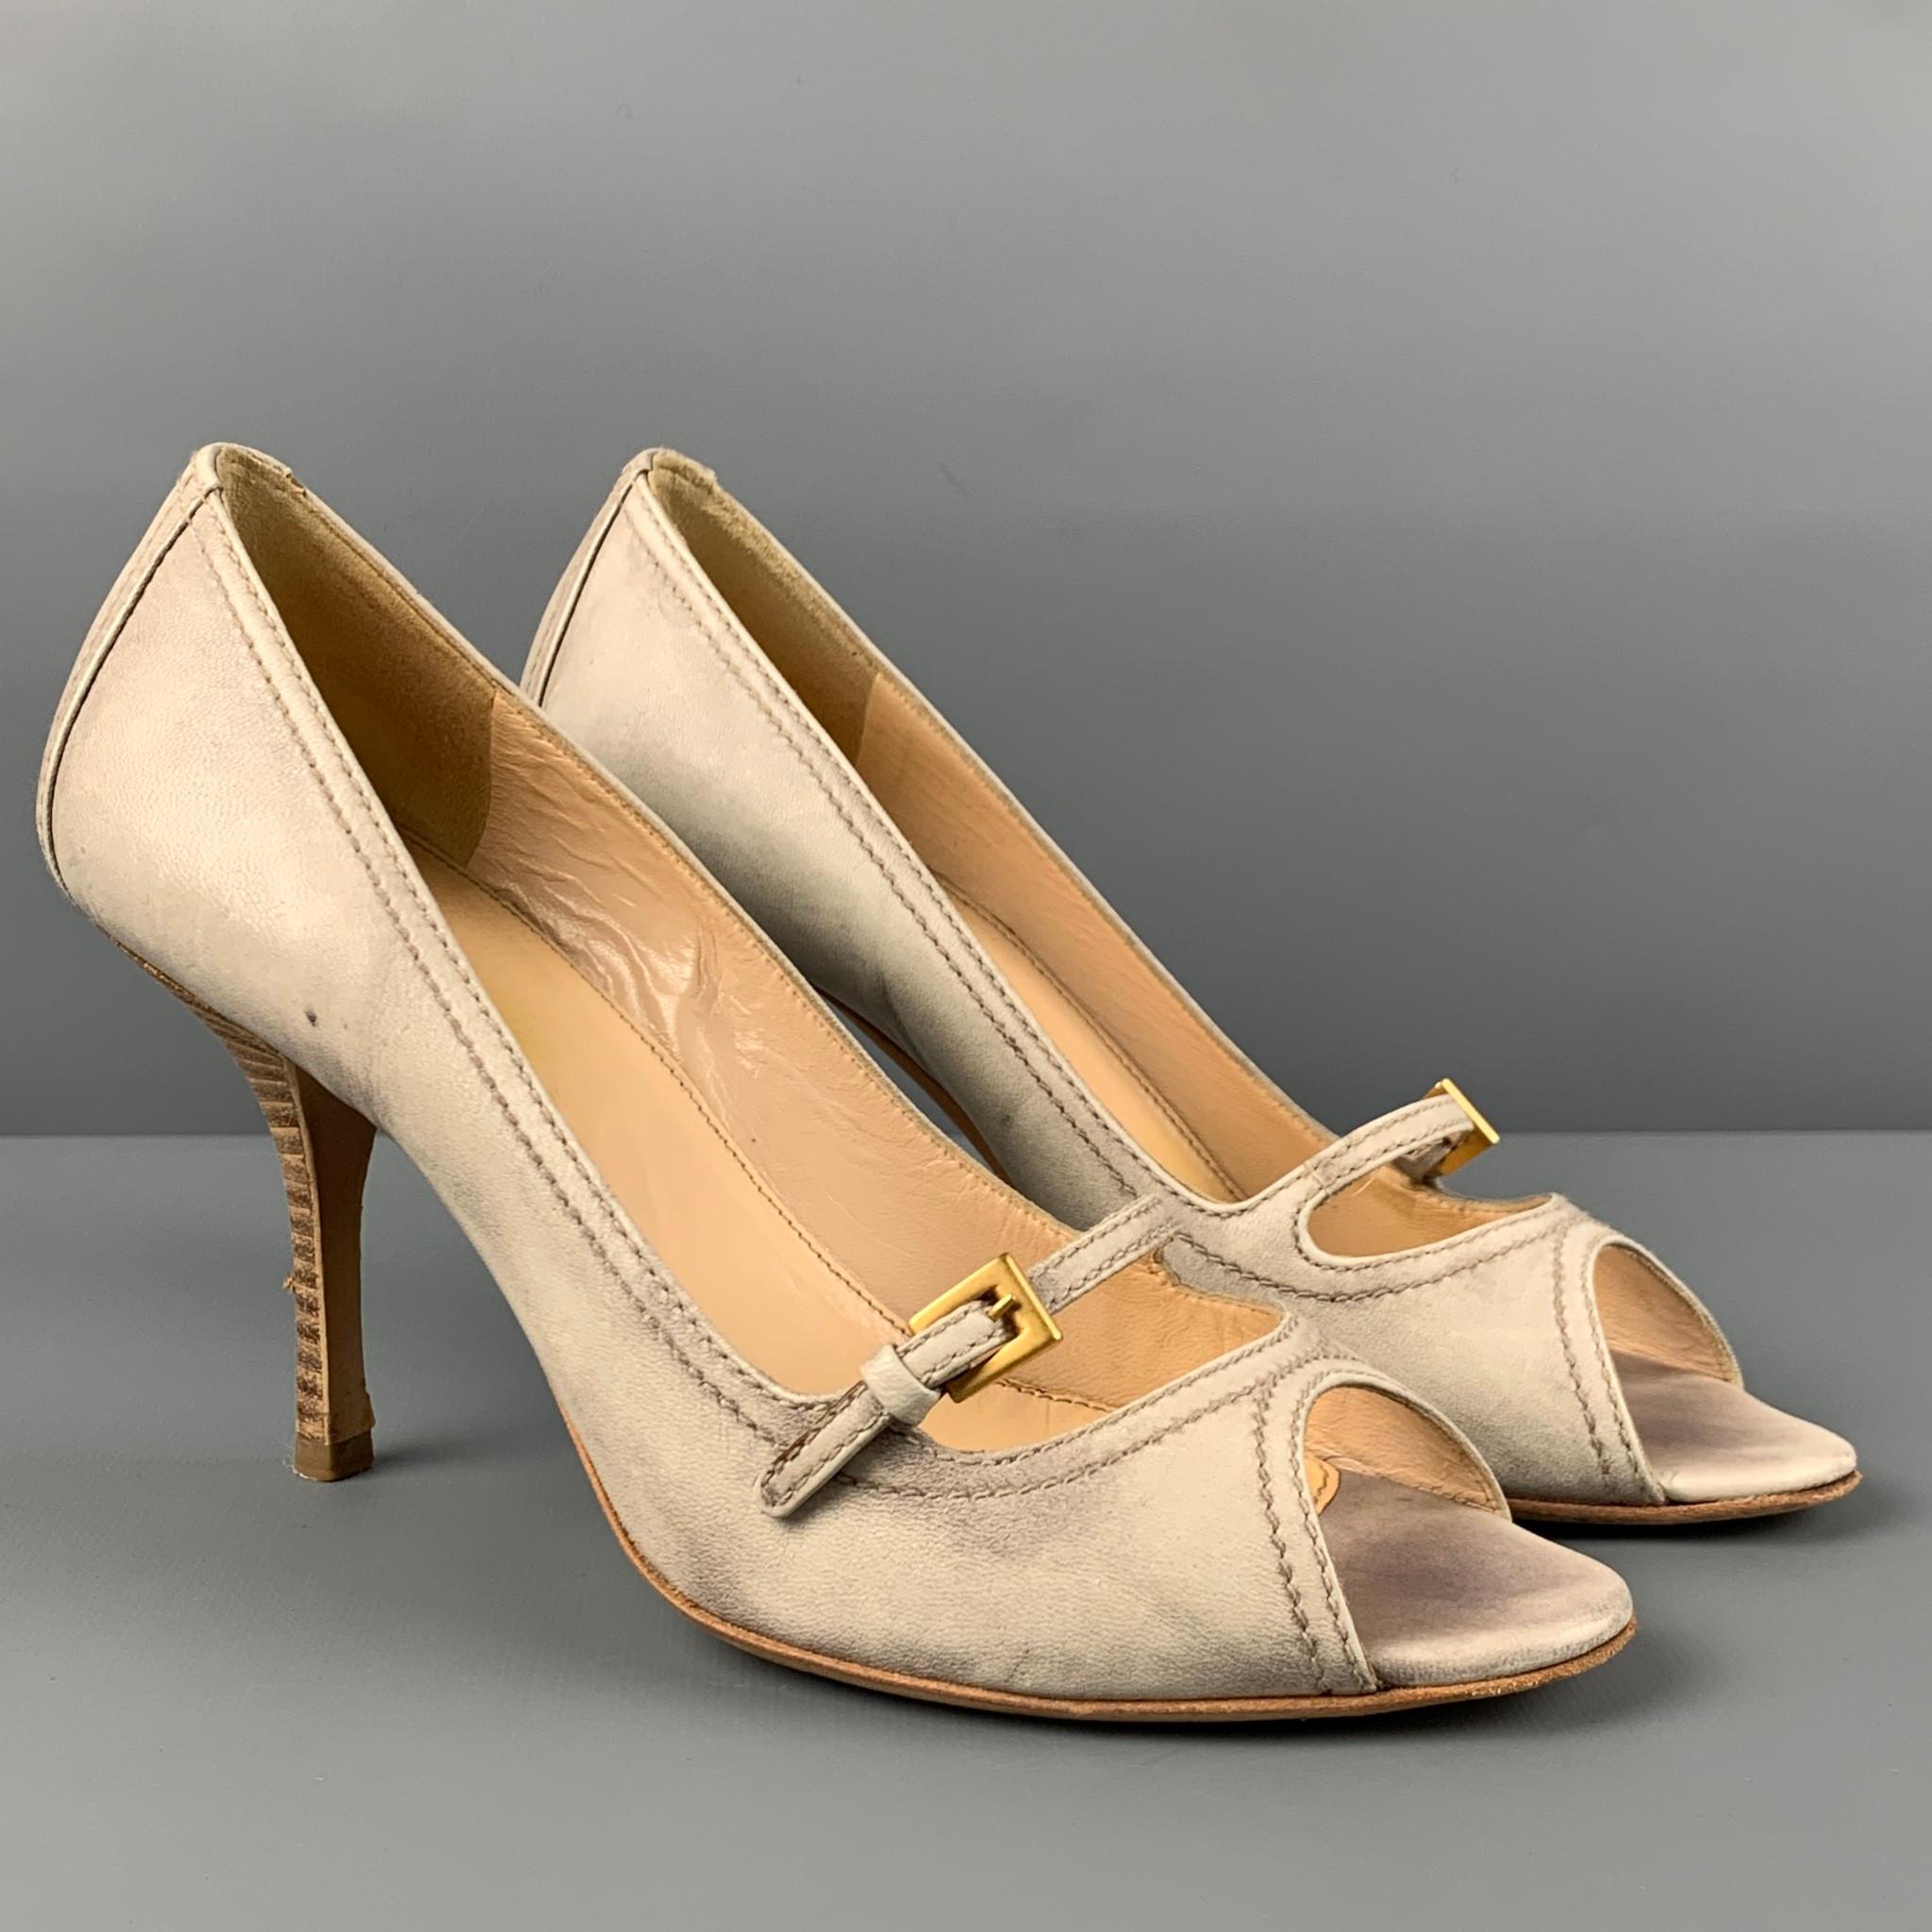 PRADA pumps comes in a beige marbled leather featuring a side buckle detail, open toe, and a stiletto heel. Made in Italy. 

Very Good Pre-Owned Condition.
Marked: 37

Measurements:

Heel: 3.5 in. 